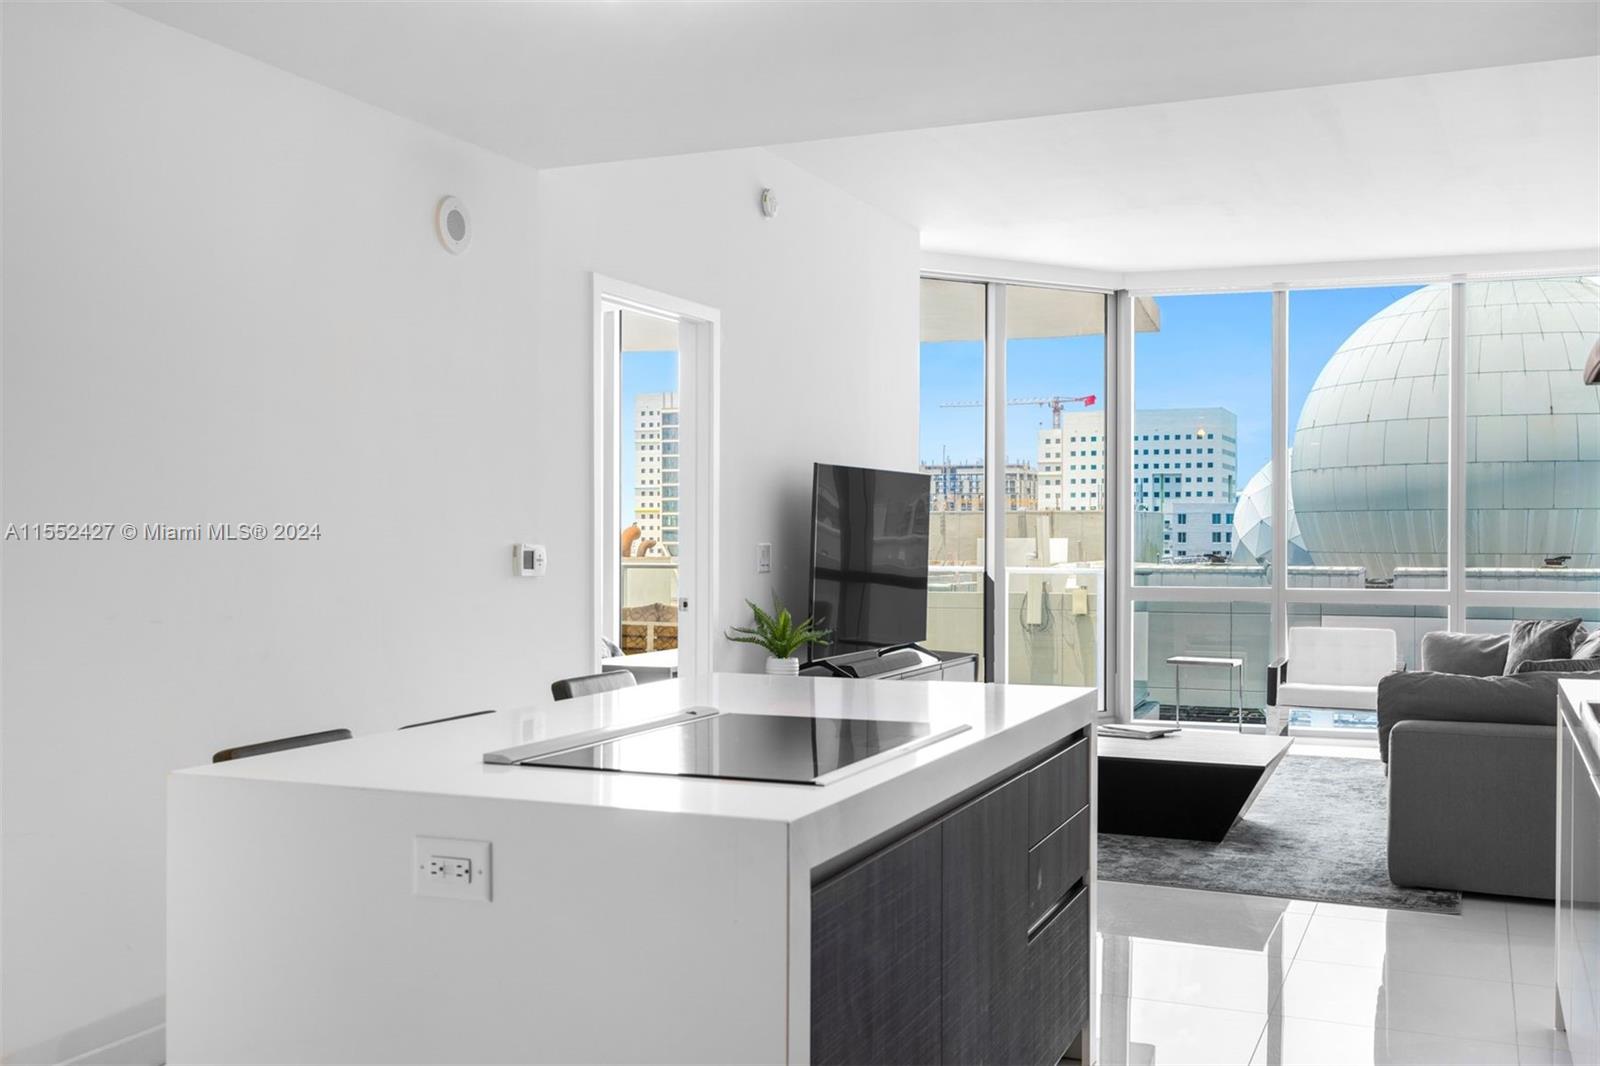 851 NE 1st Ave Unit 1008, Miami, Florida, 33132, United States, 2 Bedrooms Bedrooms, ,3 BathroomsBathrooms,Residential,For Sale,851 NE 1st Ave Unit 1008,1486496